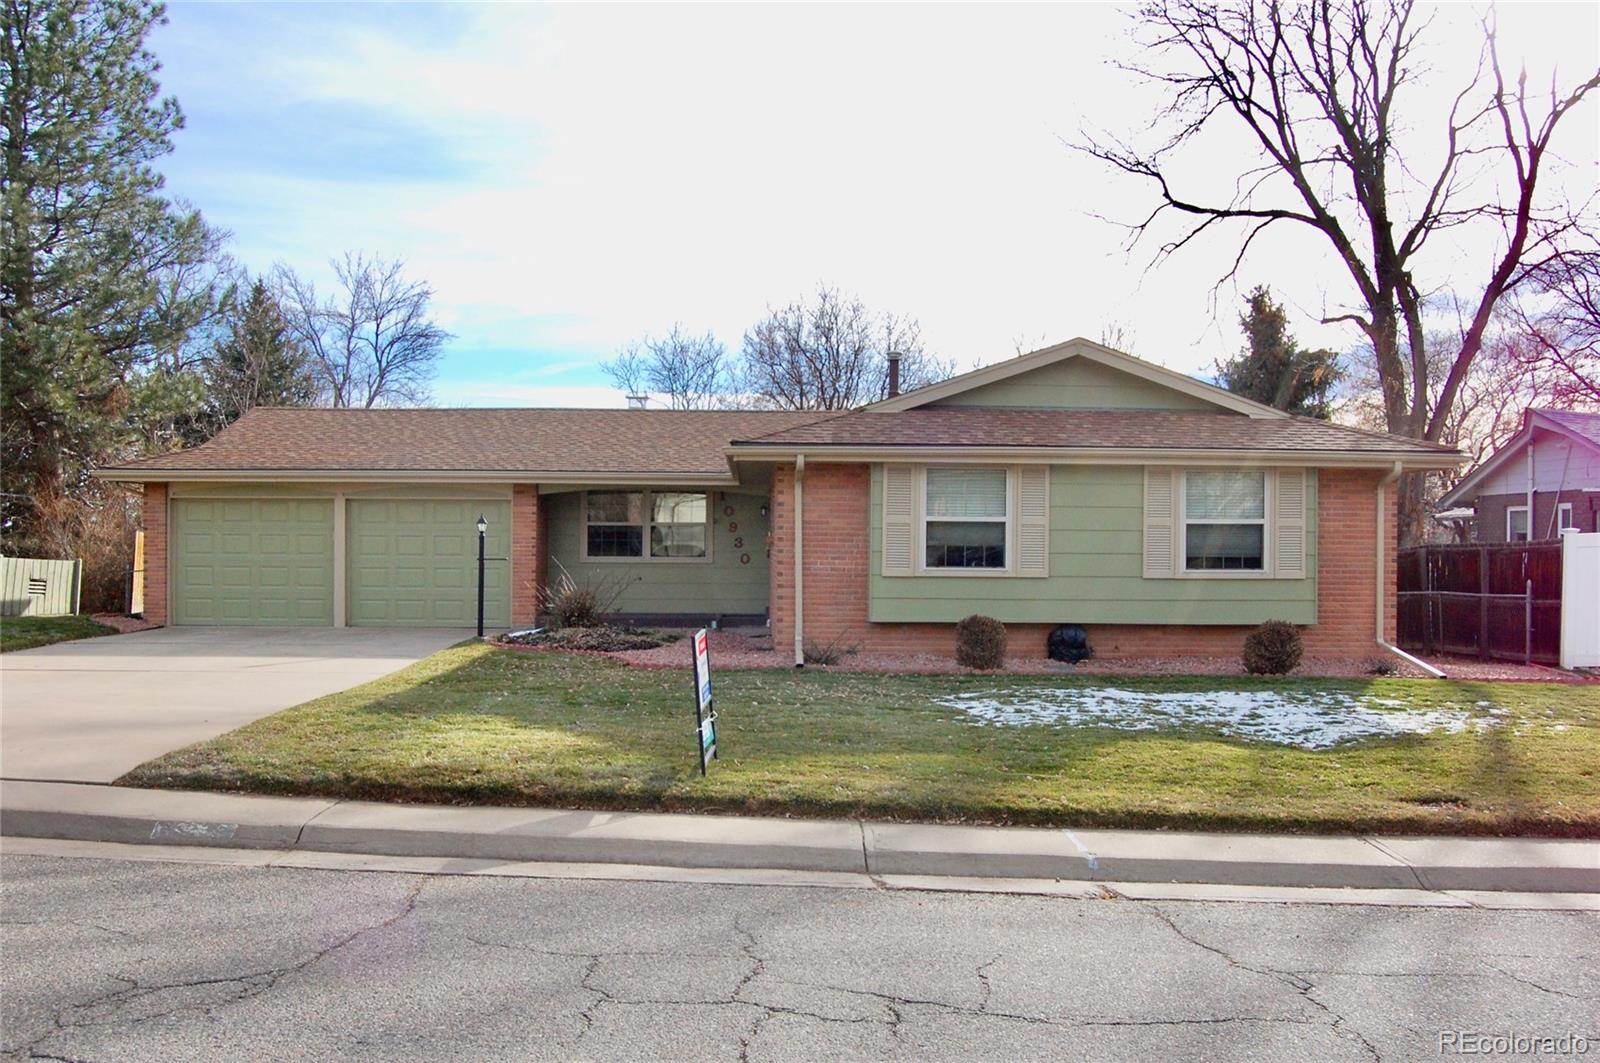 10930 w 71st place, Arvada sold home. Closed on 2024-05-17 for $645,000.